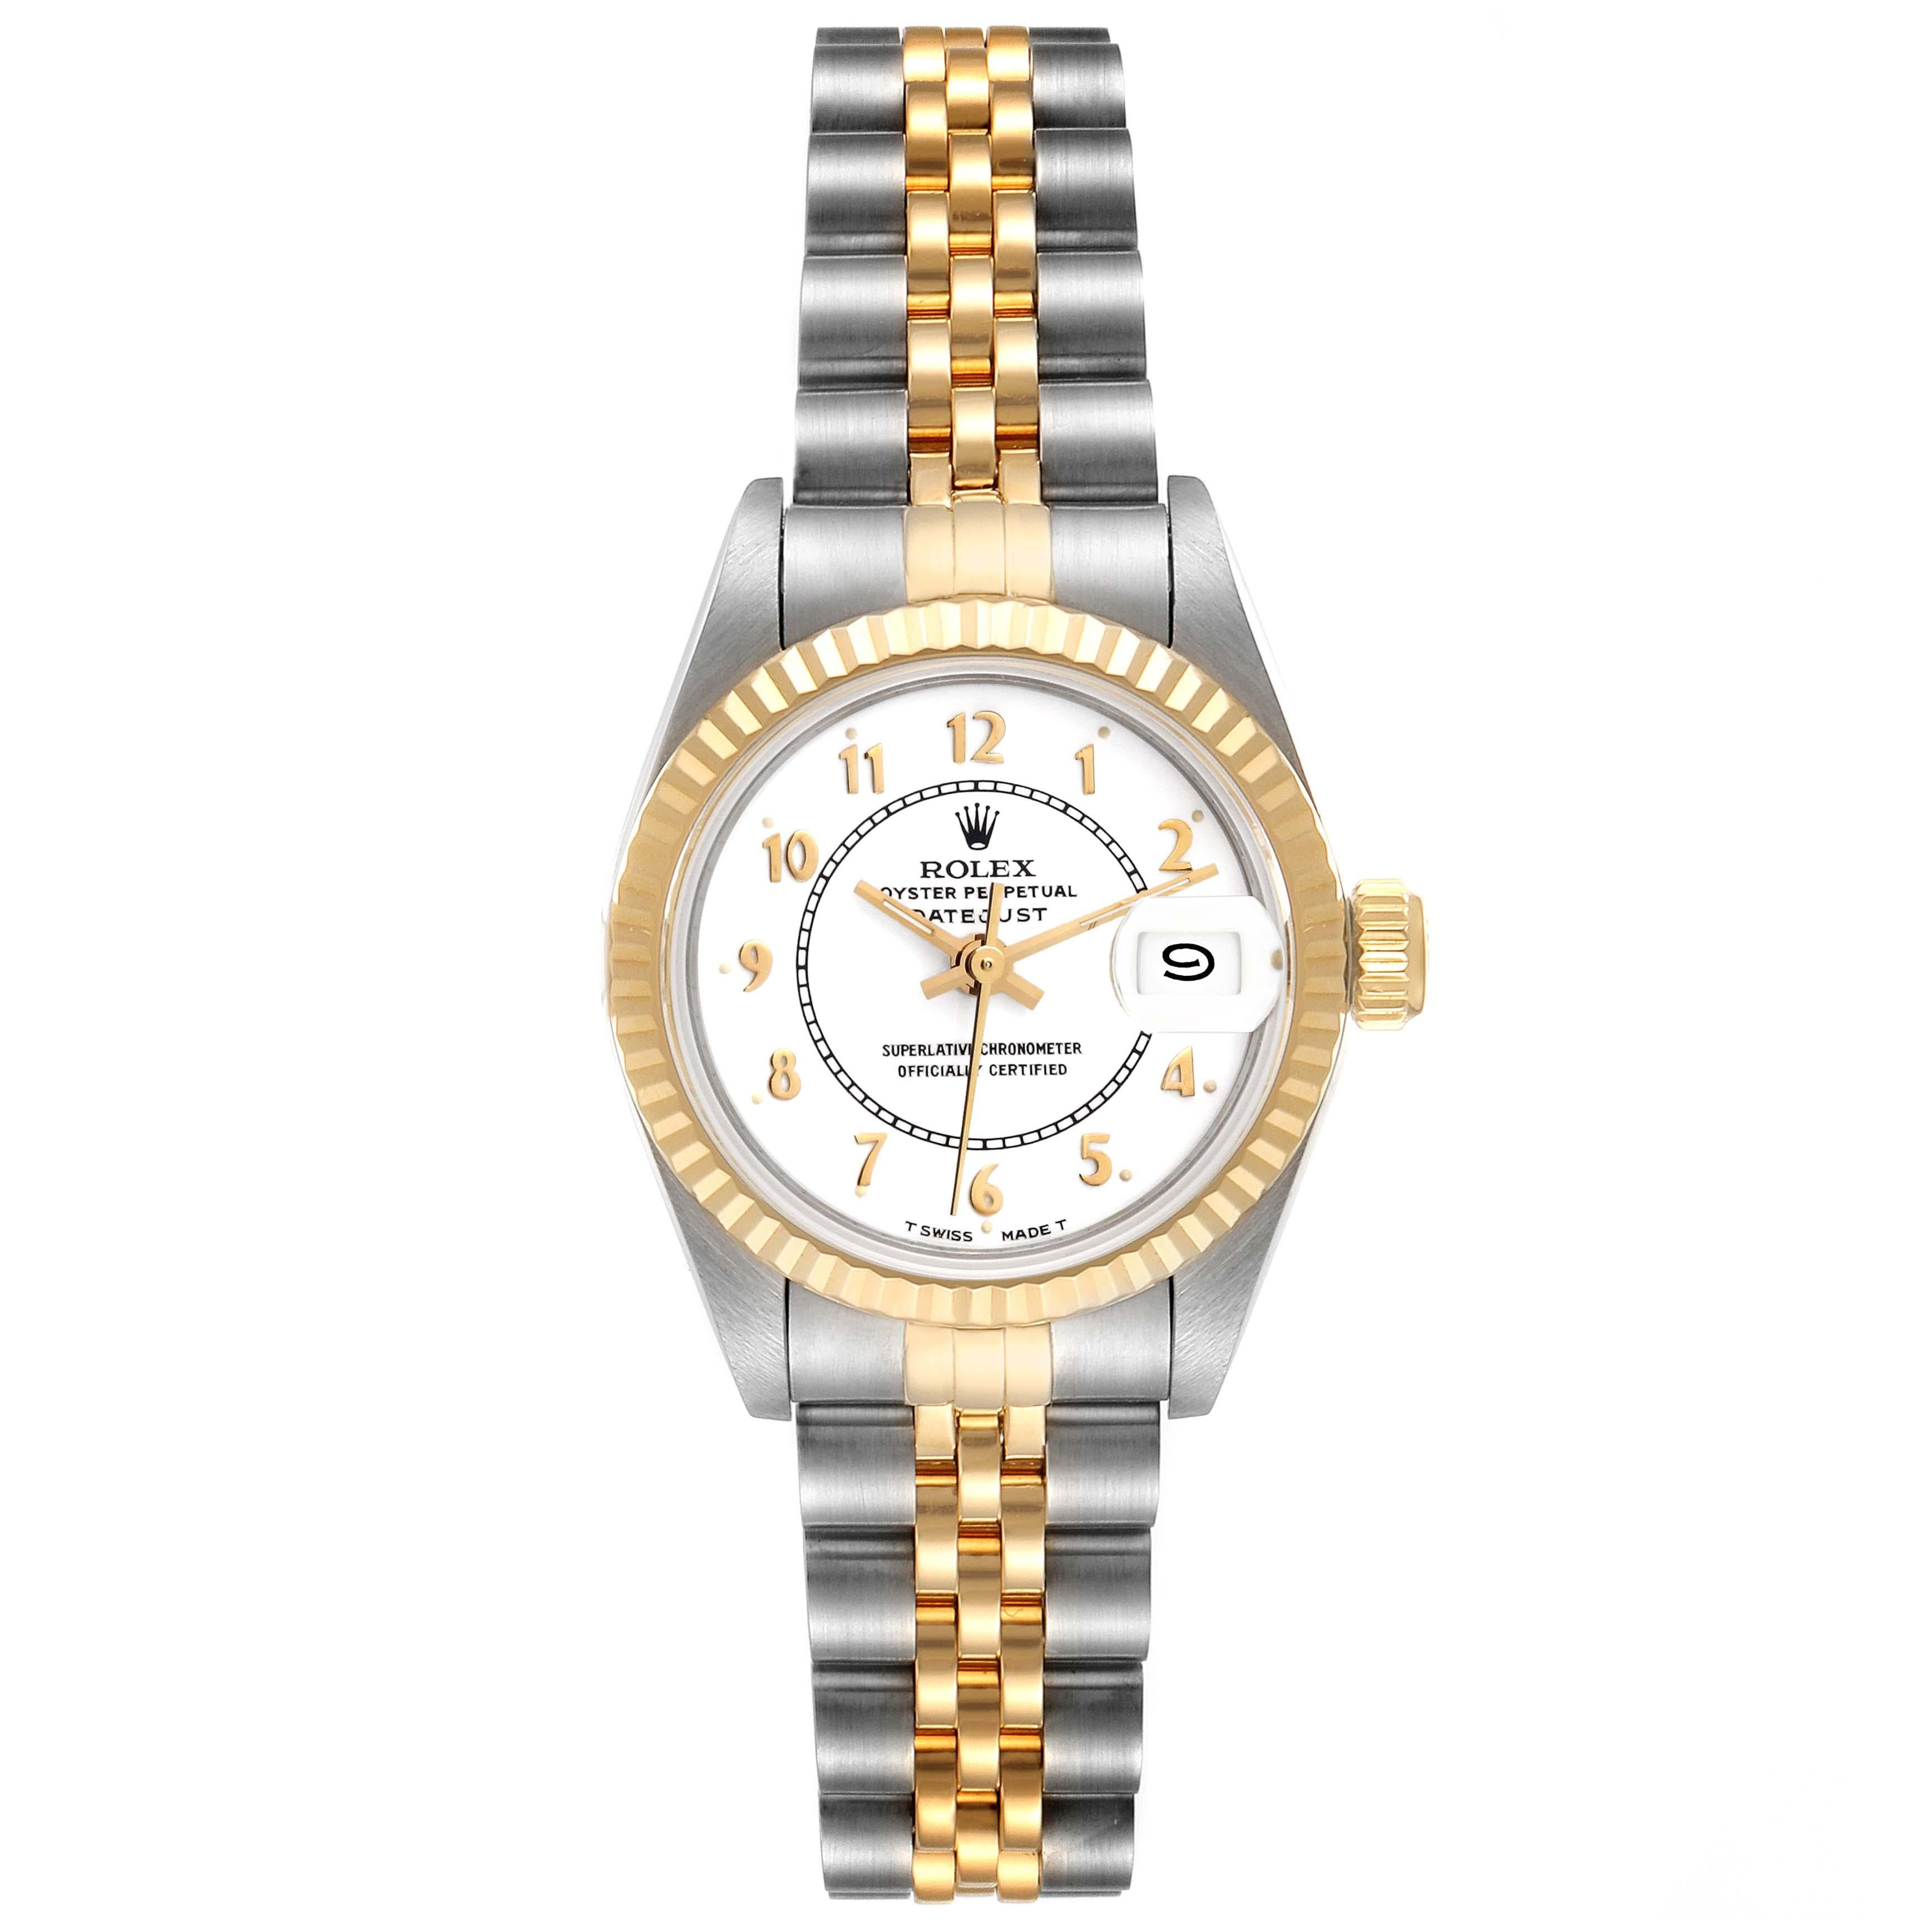 Rolex Datejust White Arabic Dial Steel Yellow Gold Ladies Watch 69173. Officially certified chronometer automatic self-winding movement. Stainless steel oyster case 26.0 mm in diameter. Rolex logo on the crown. 18k yellow gold fluted bezel. Scratch